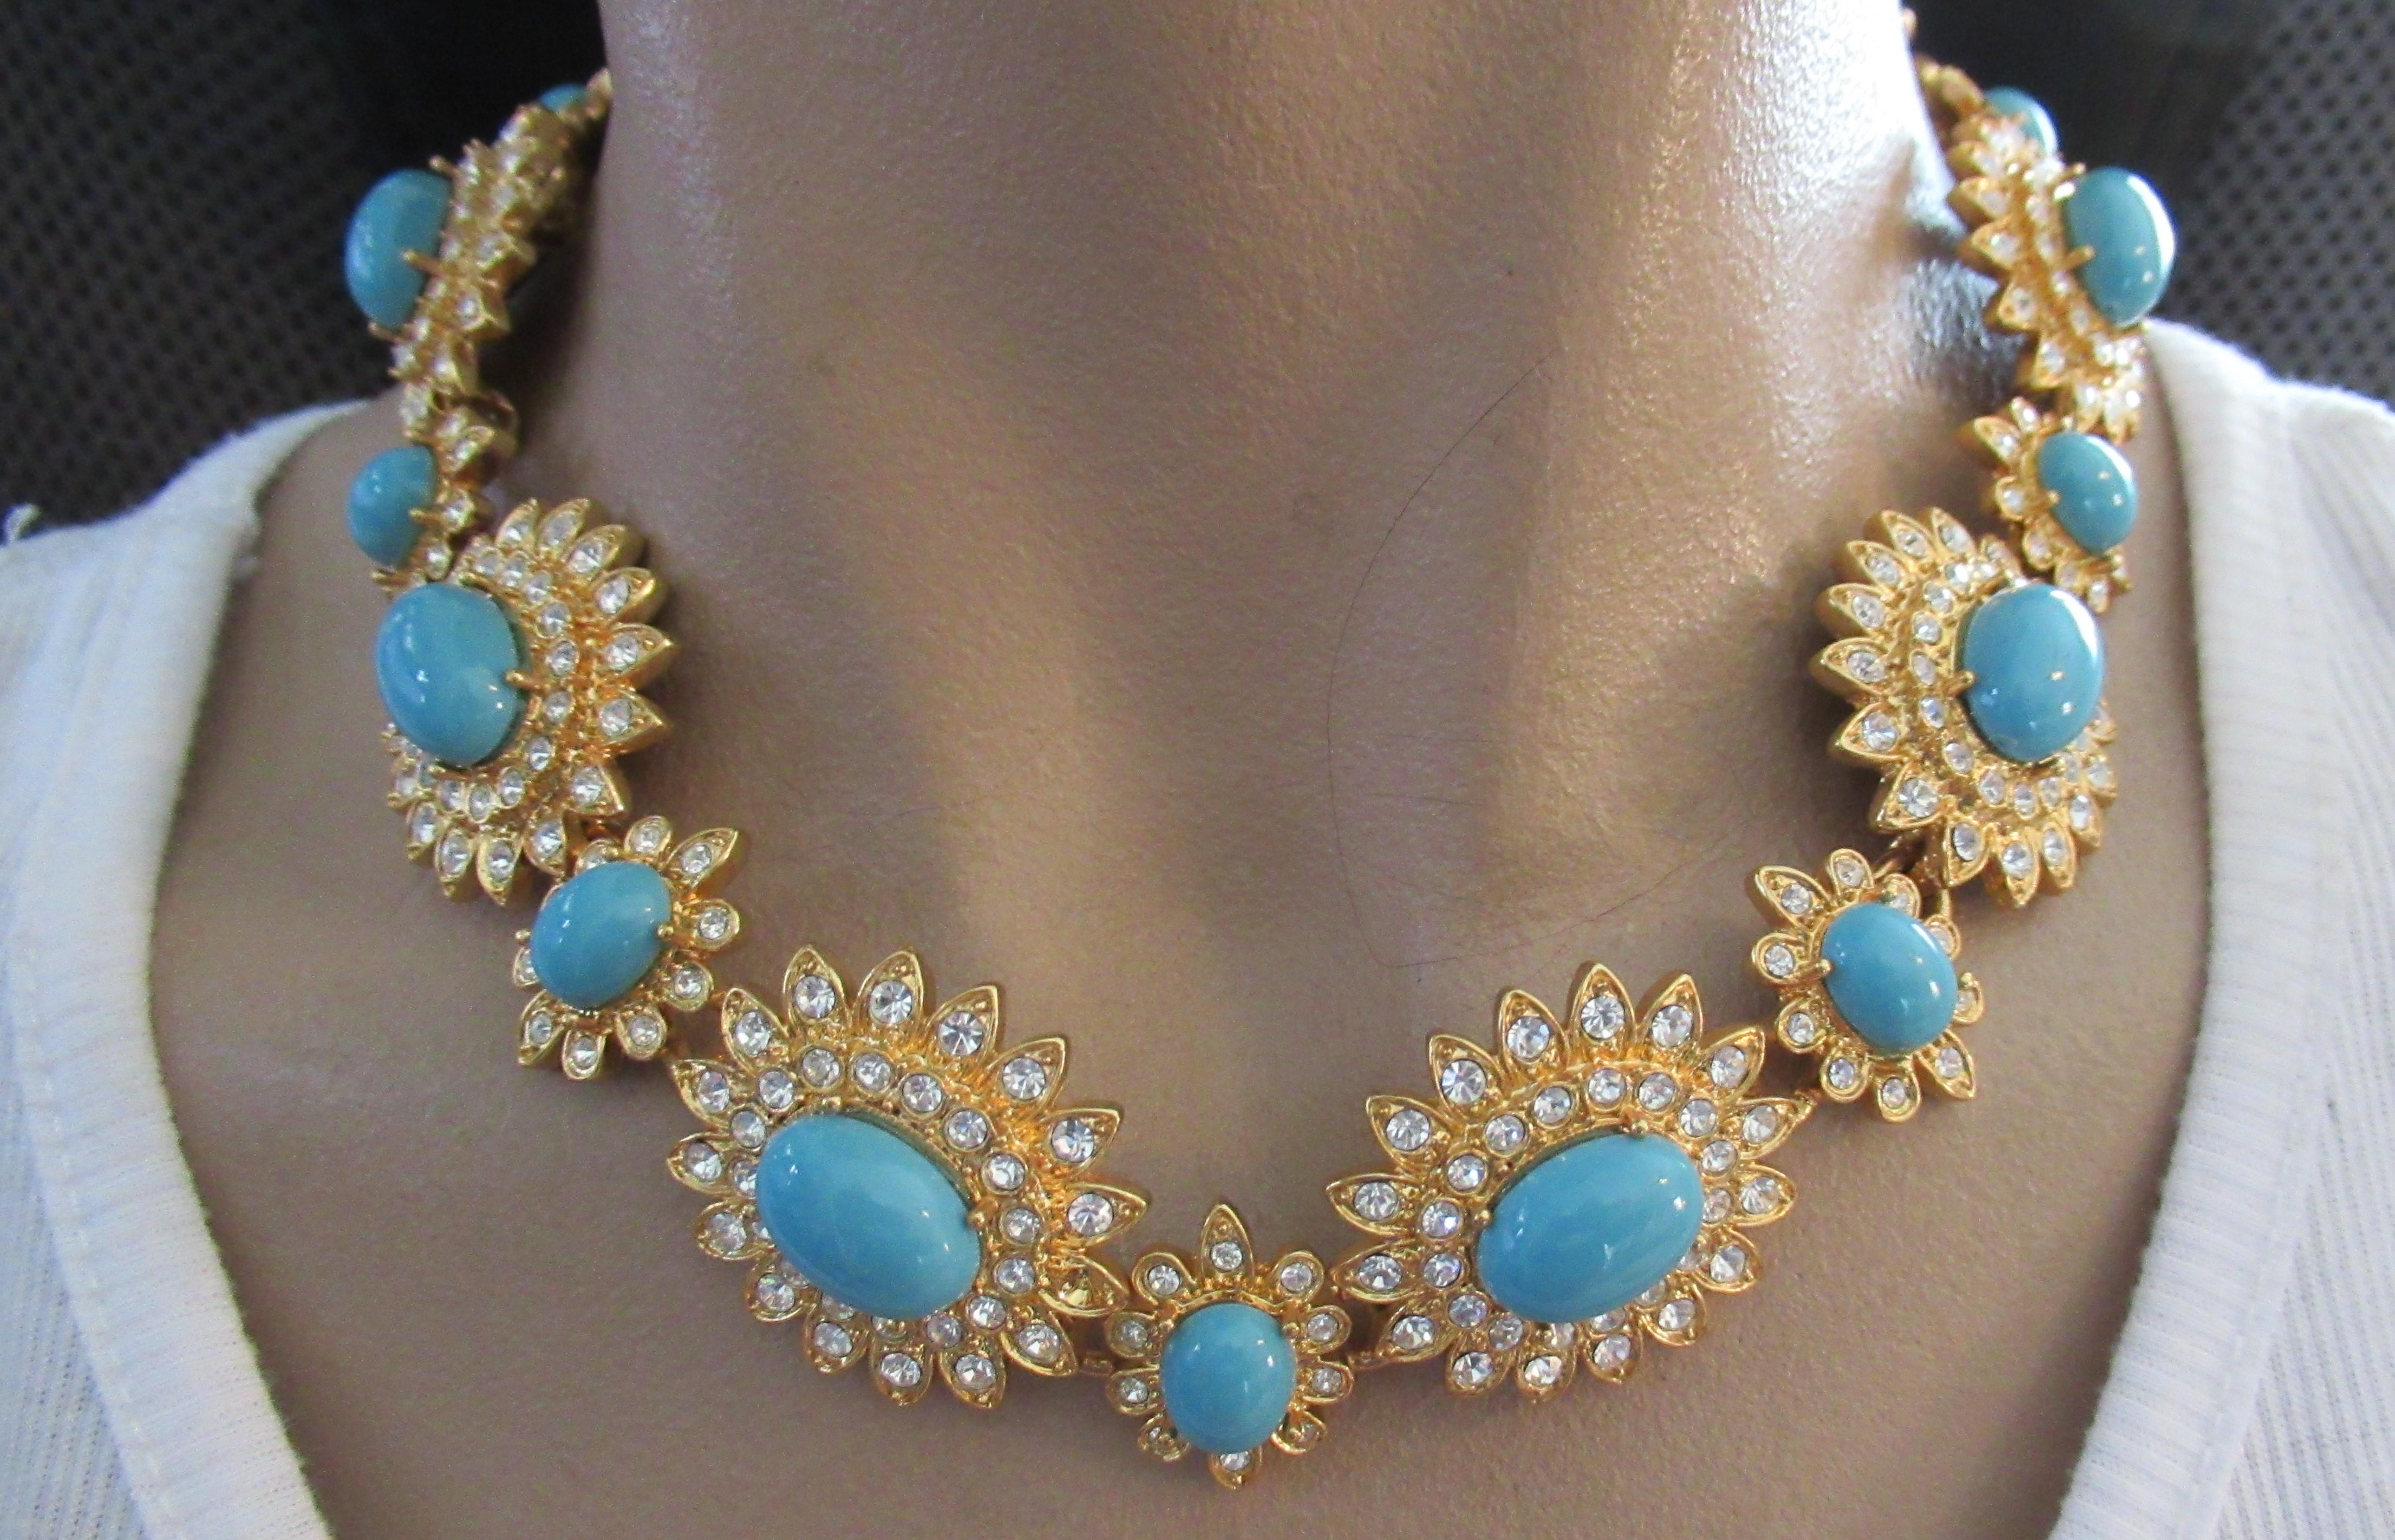 Beautiful and Stylish Vintage SCASSI Necklace. Each Floral link center Hand set with Faux Blue Cabochon Turquoise and surrounded by Sparkling Ice Crystals. Signed SCASS; Necklace measures approx. 16.5” Long and the large flowers are 1.25